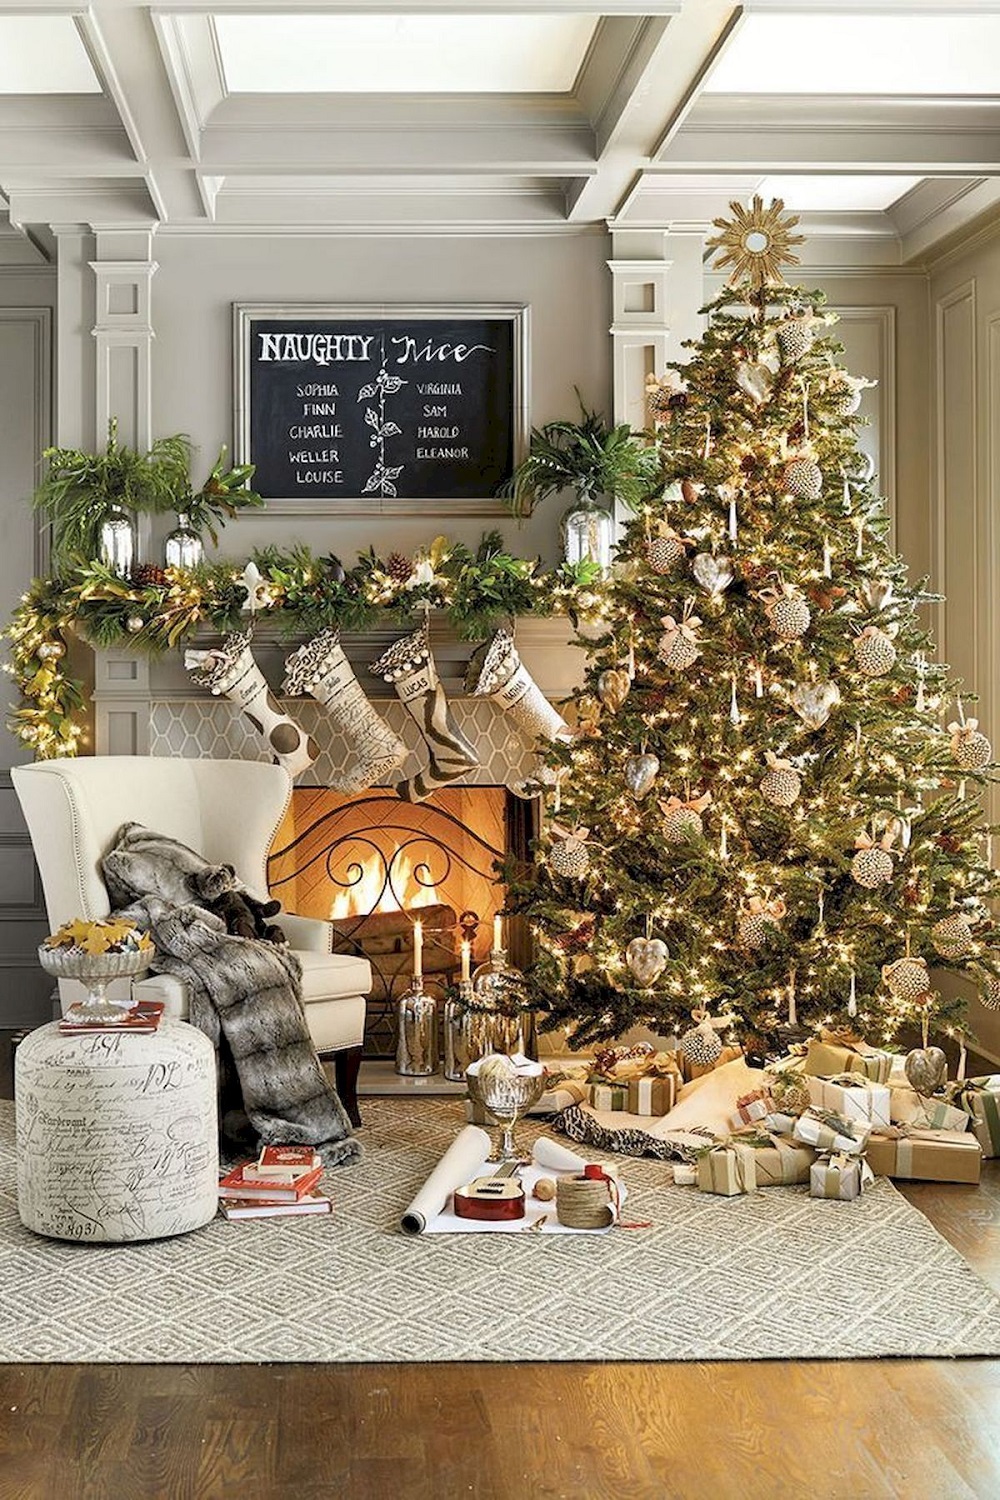 t4-11 Modern Christmas decorations ideas that are heartwarming